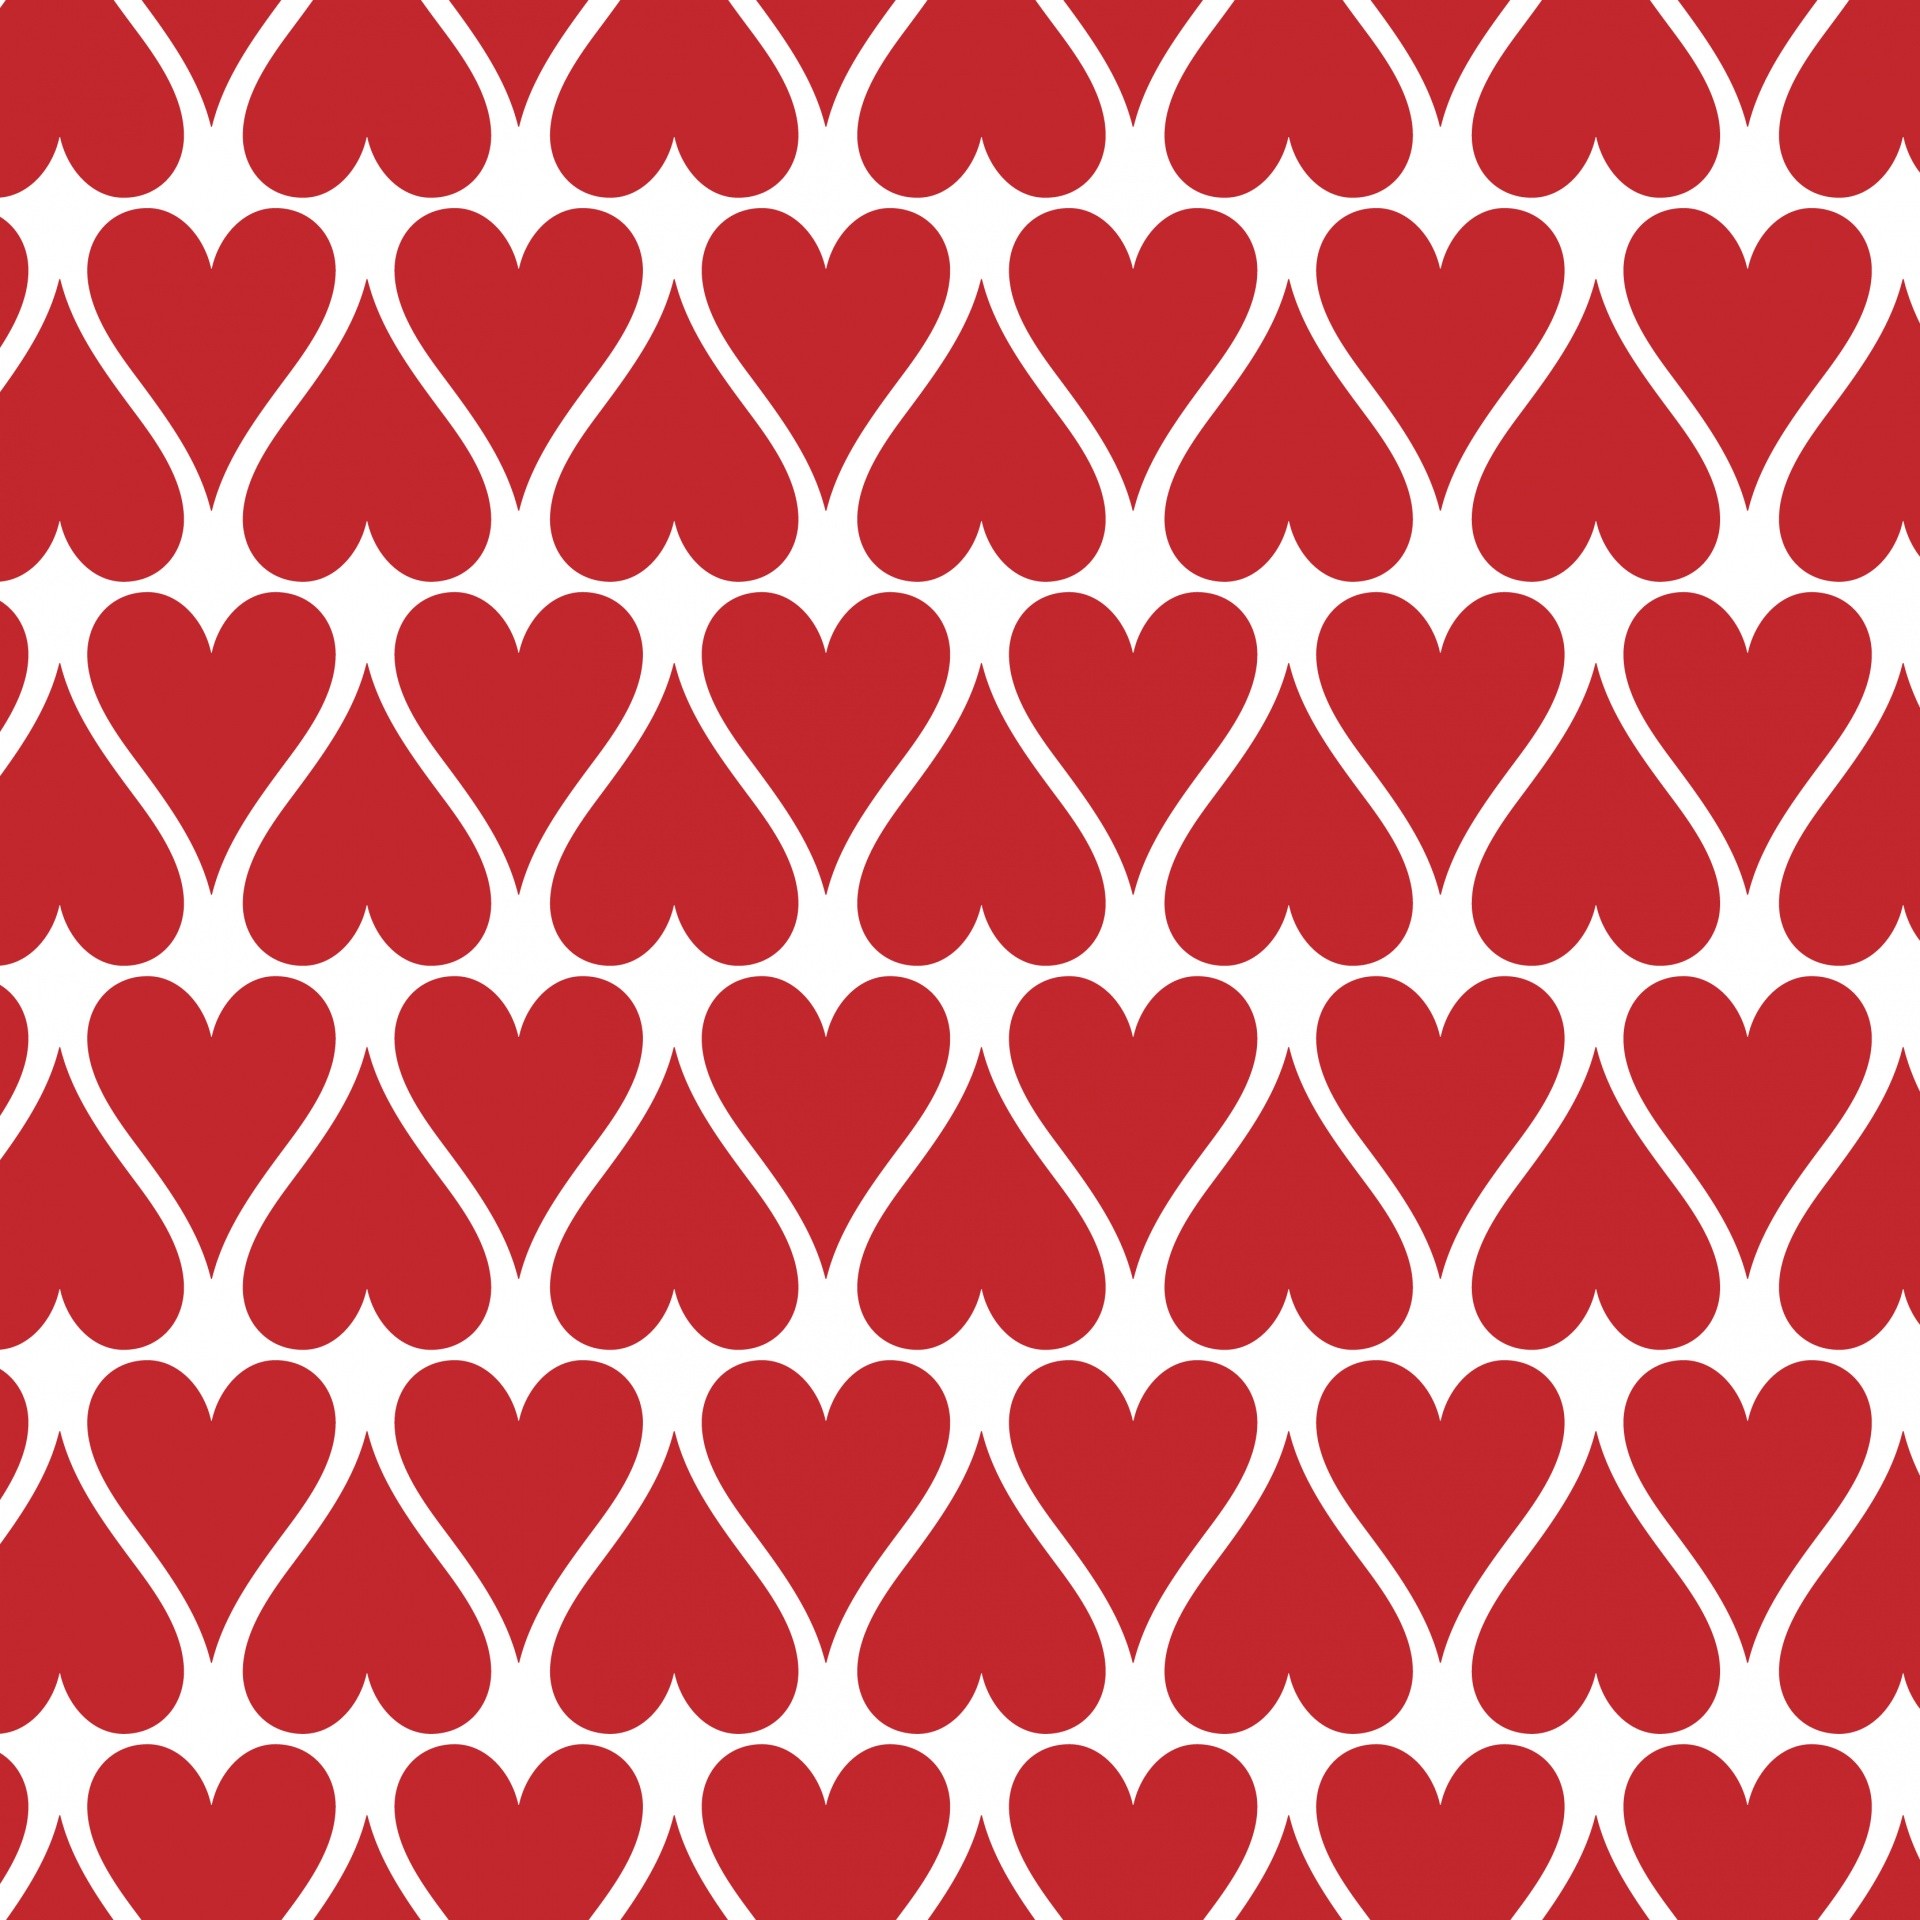 1920x1920 Red Hearts Wallpaper Background